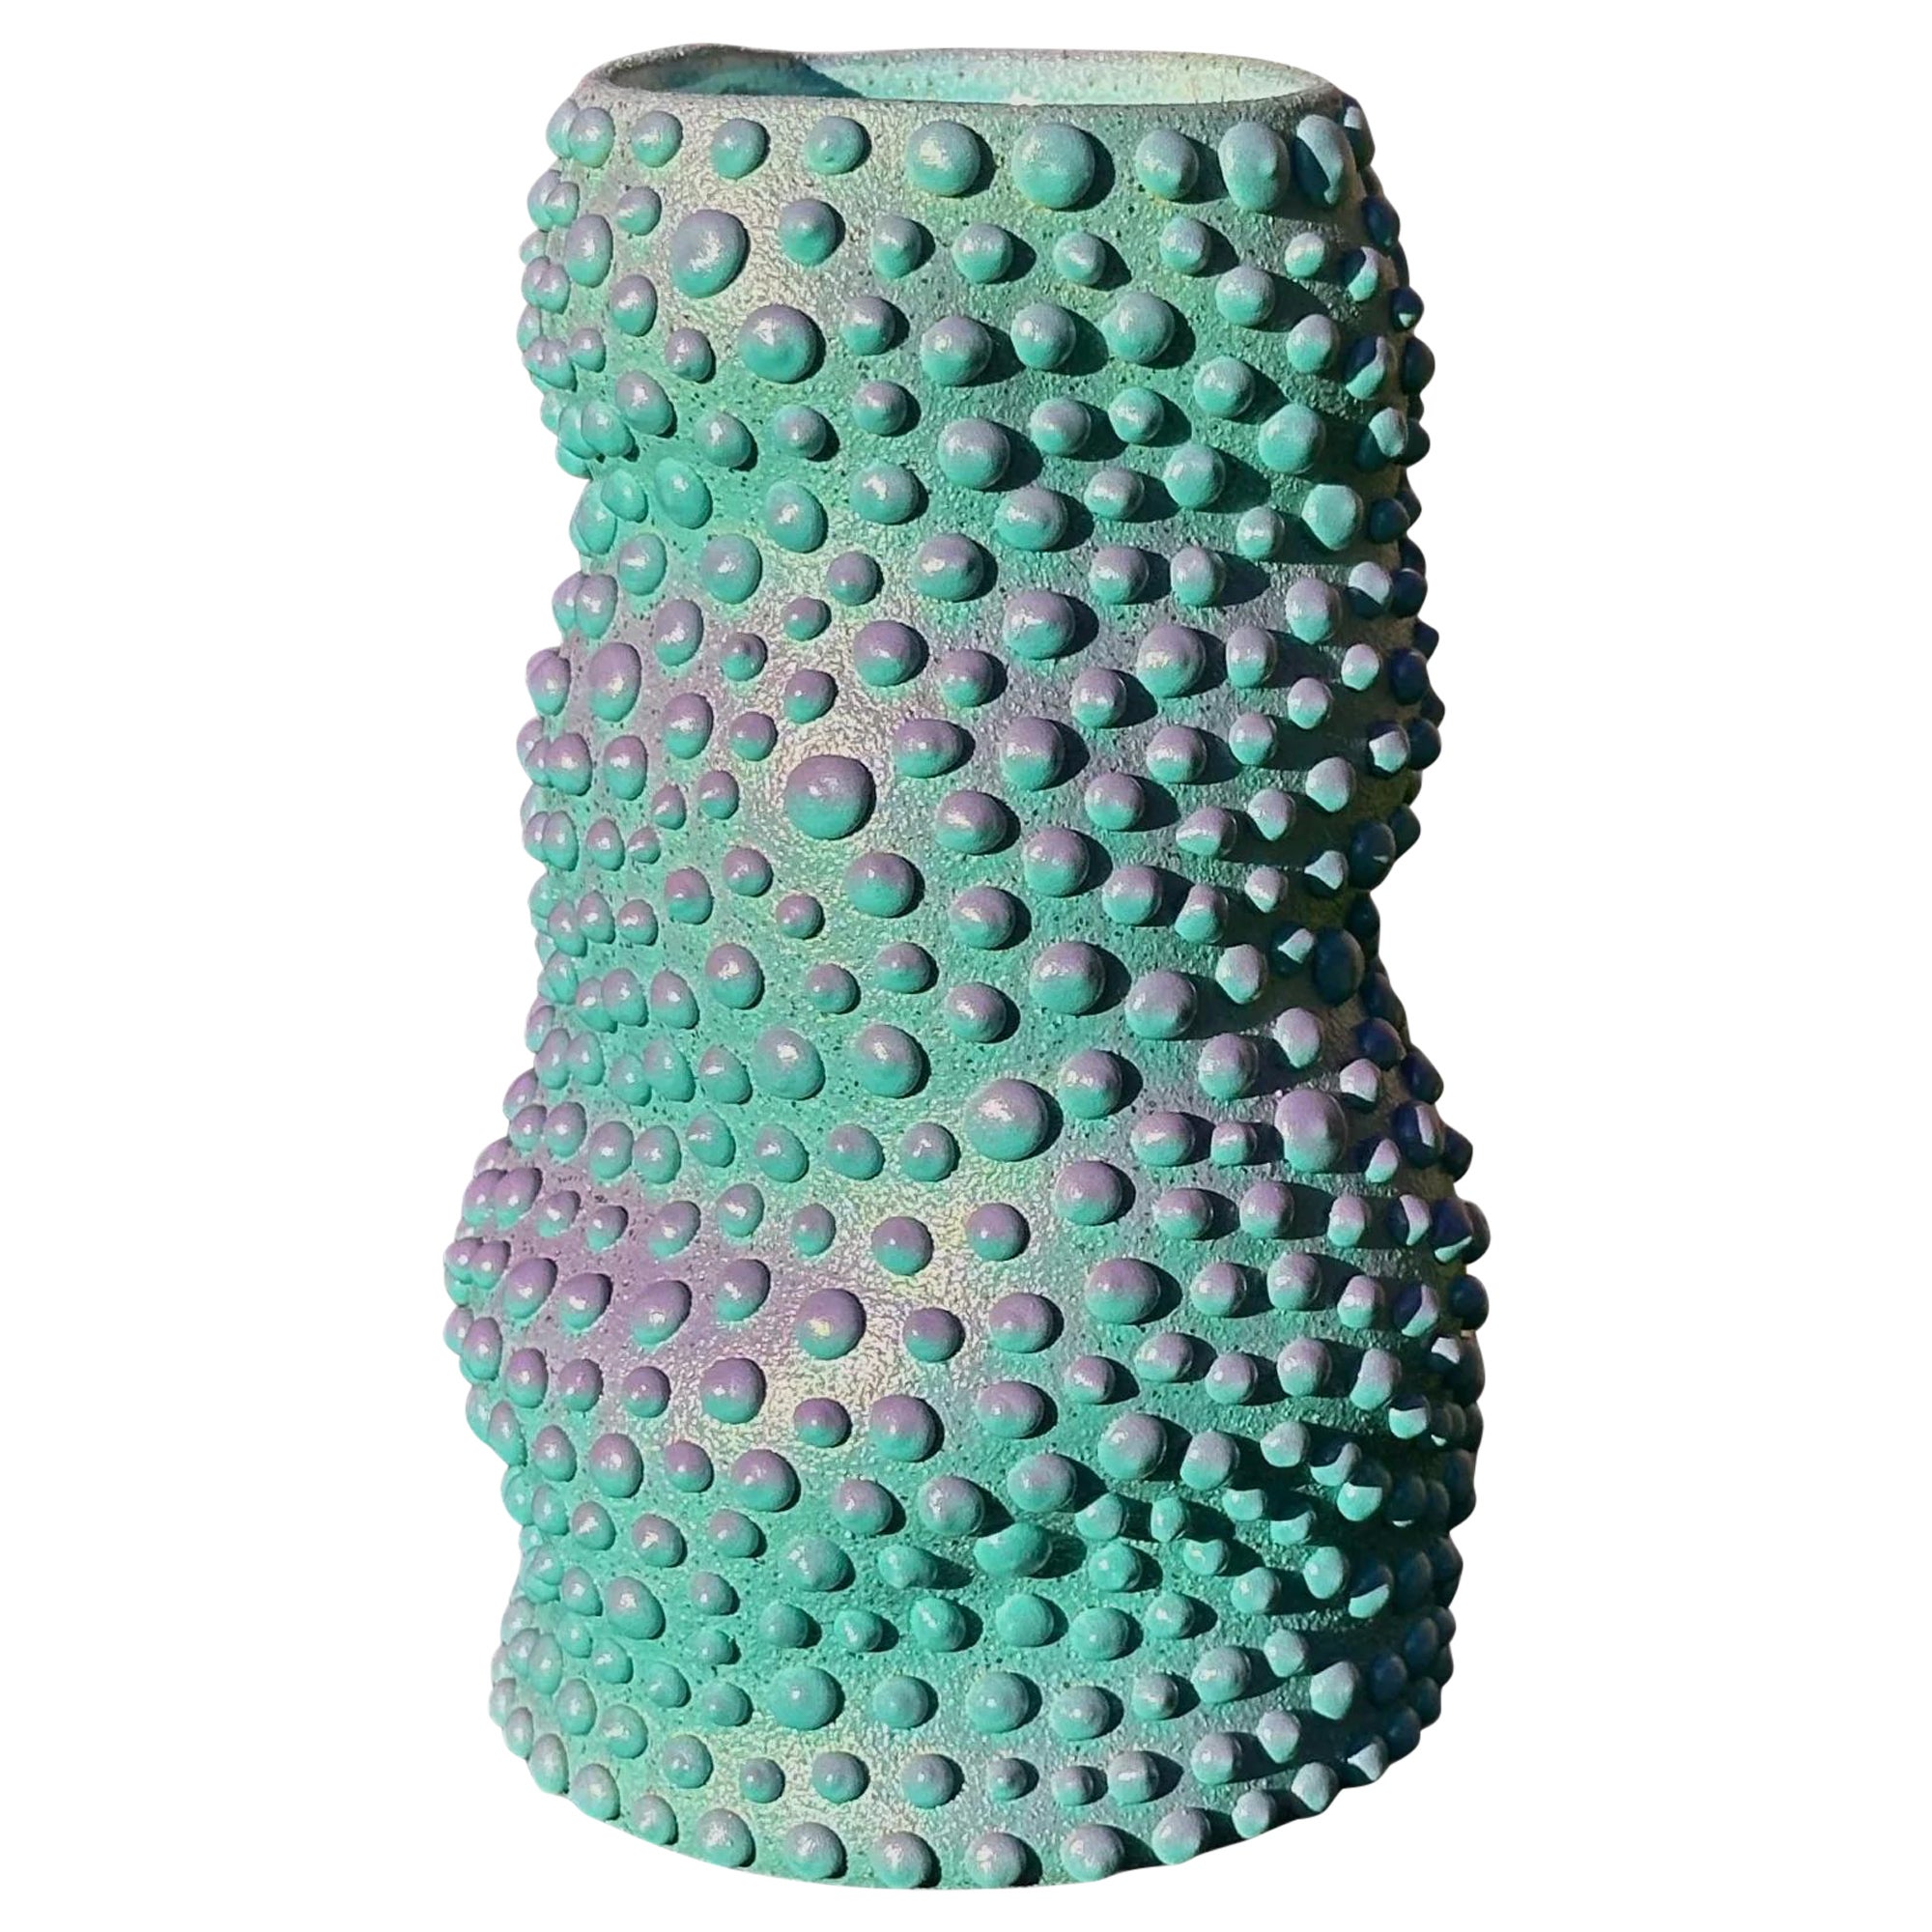 Teal And Purple Wavy Organic Dot Ombre Vase For Sale